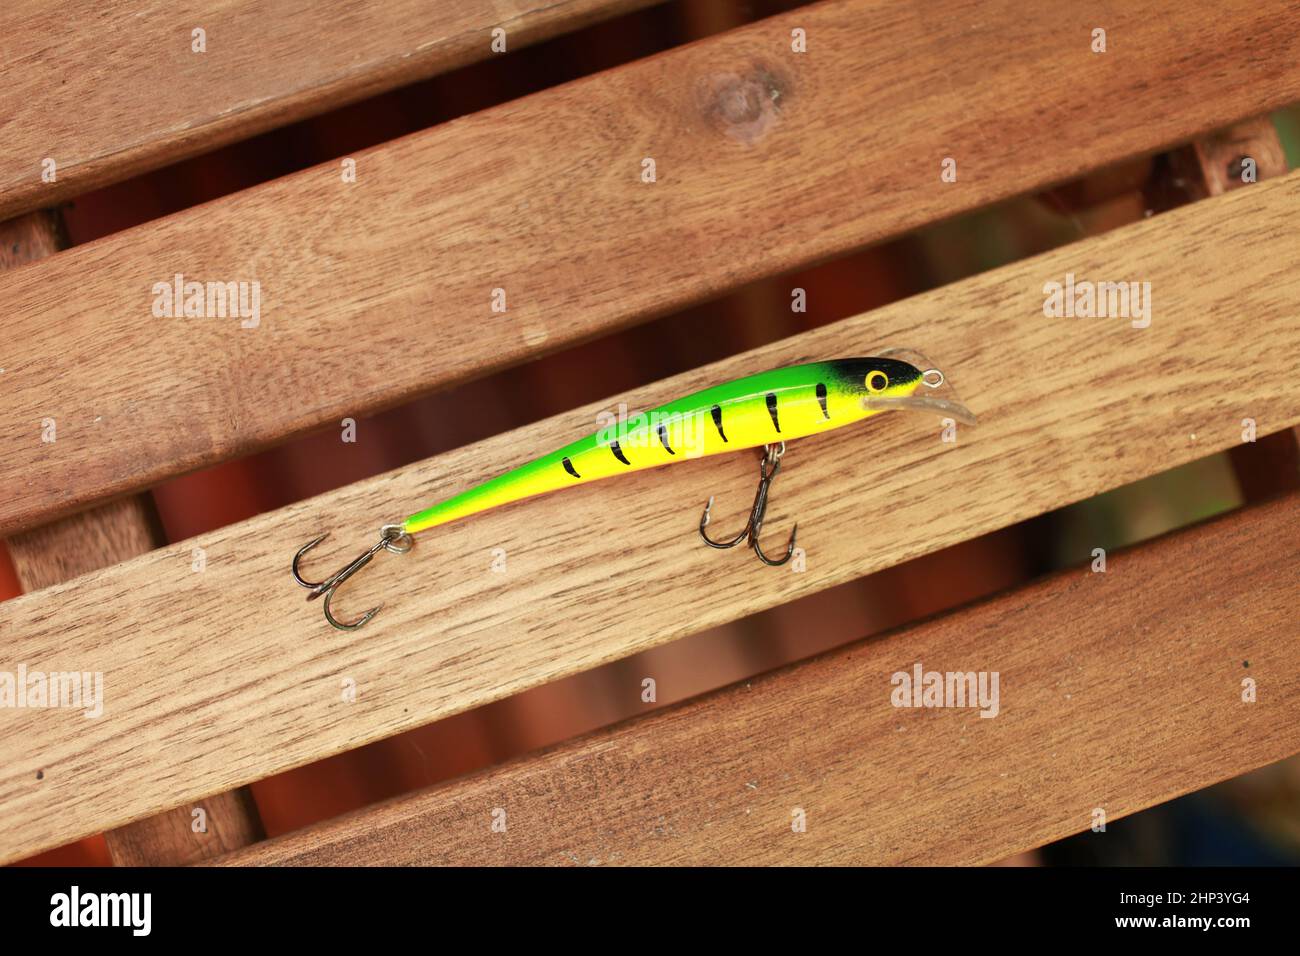 homemade wobbler for fishing large fish on the wooden deck Stock